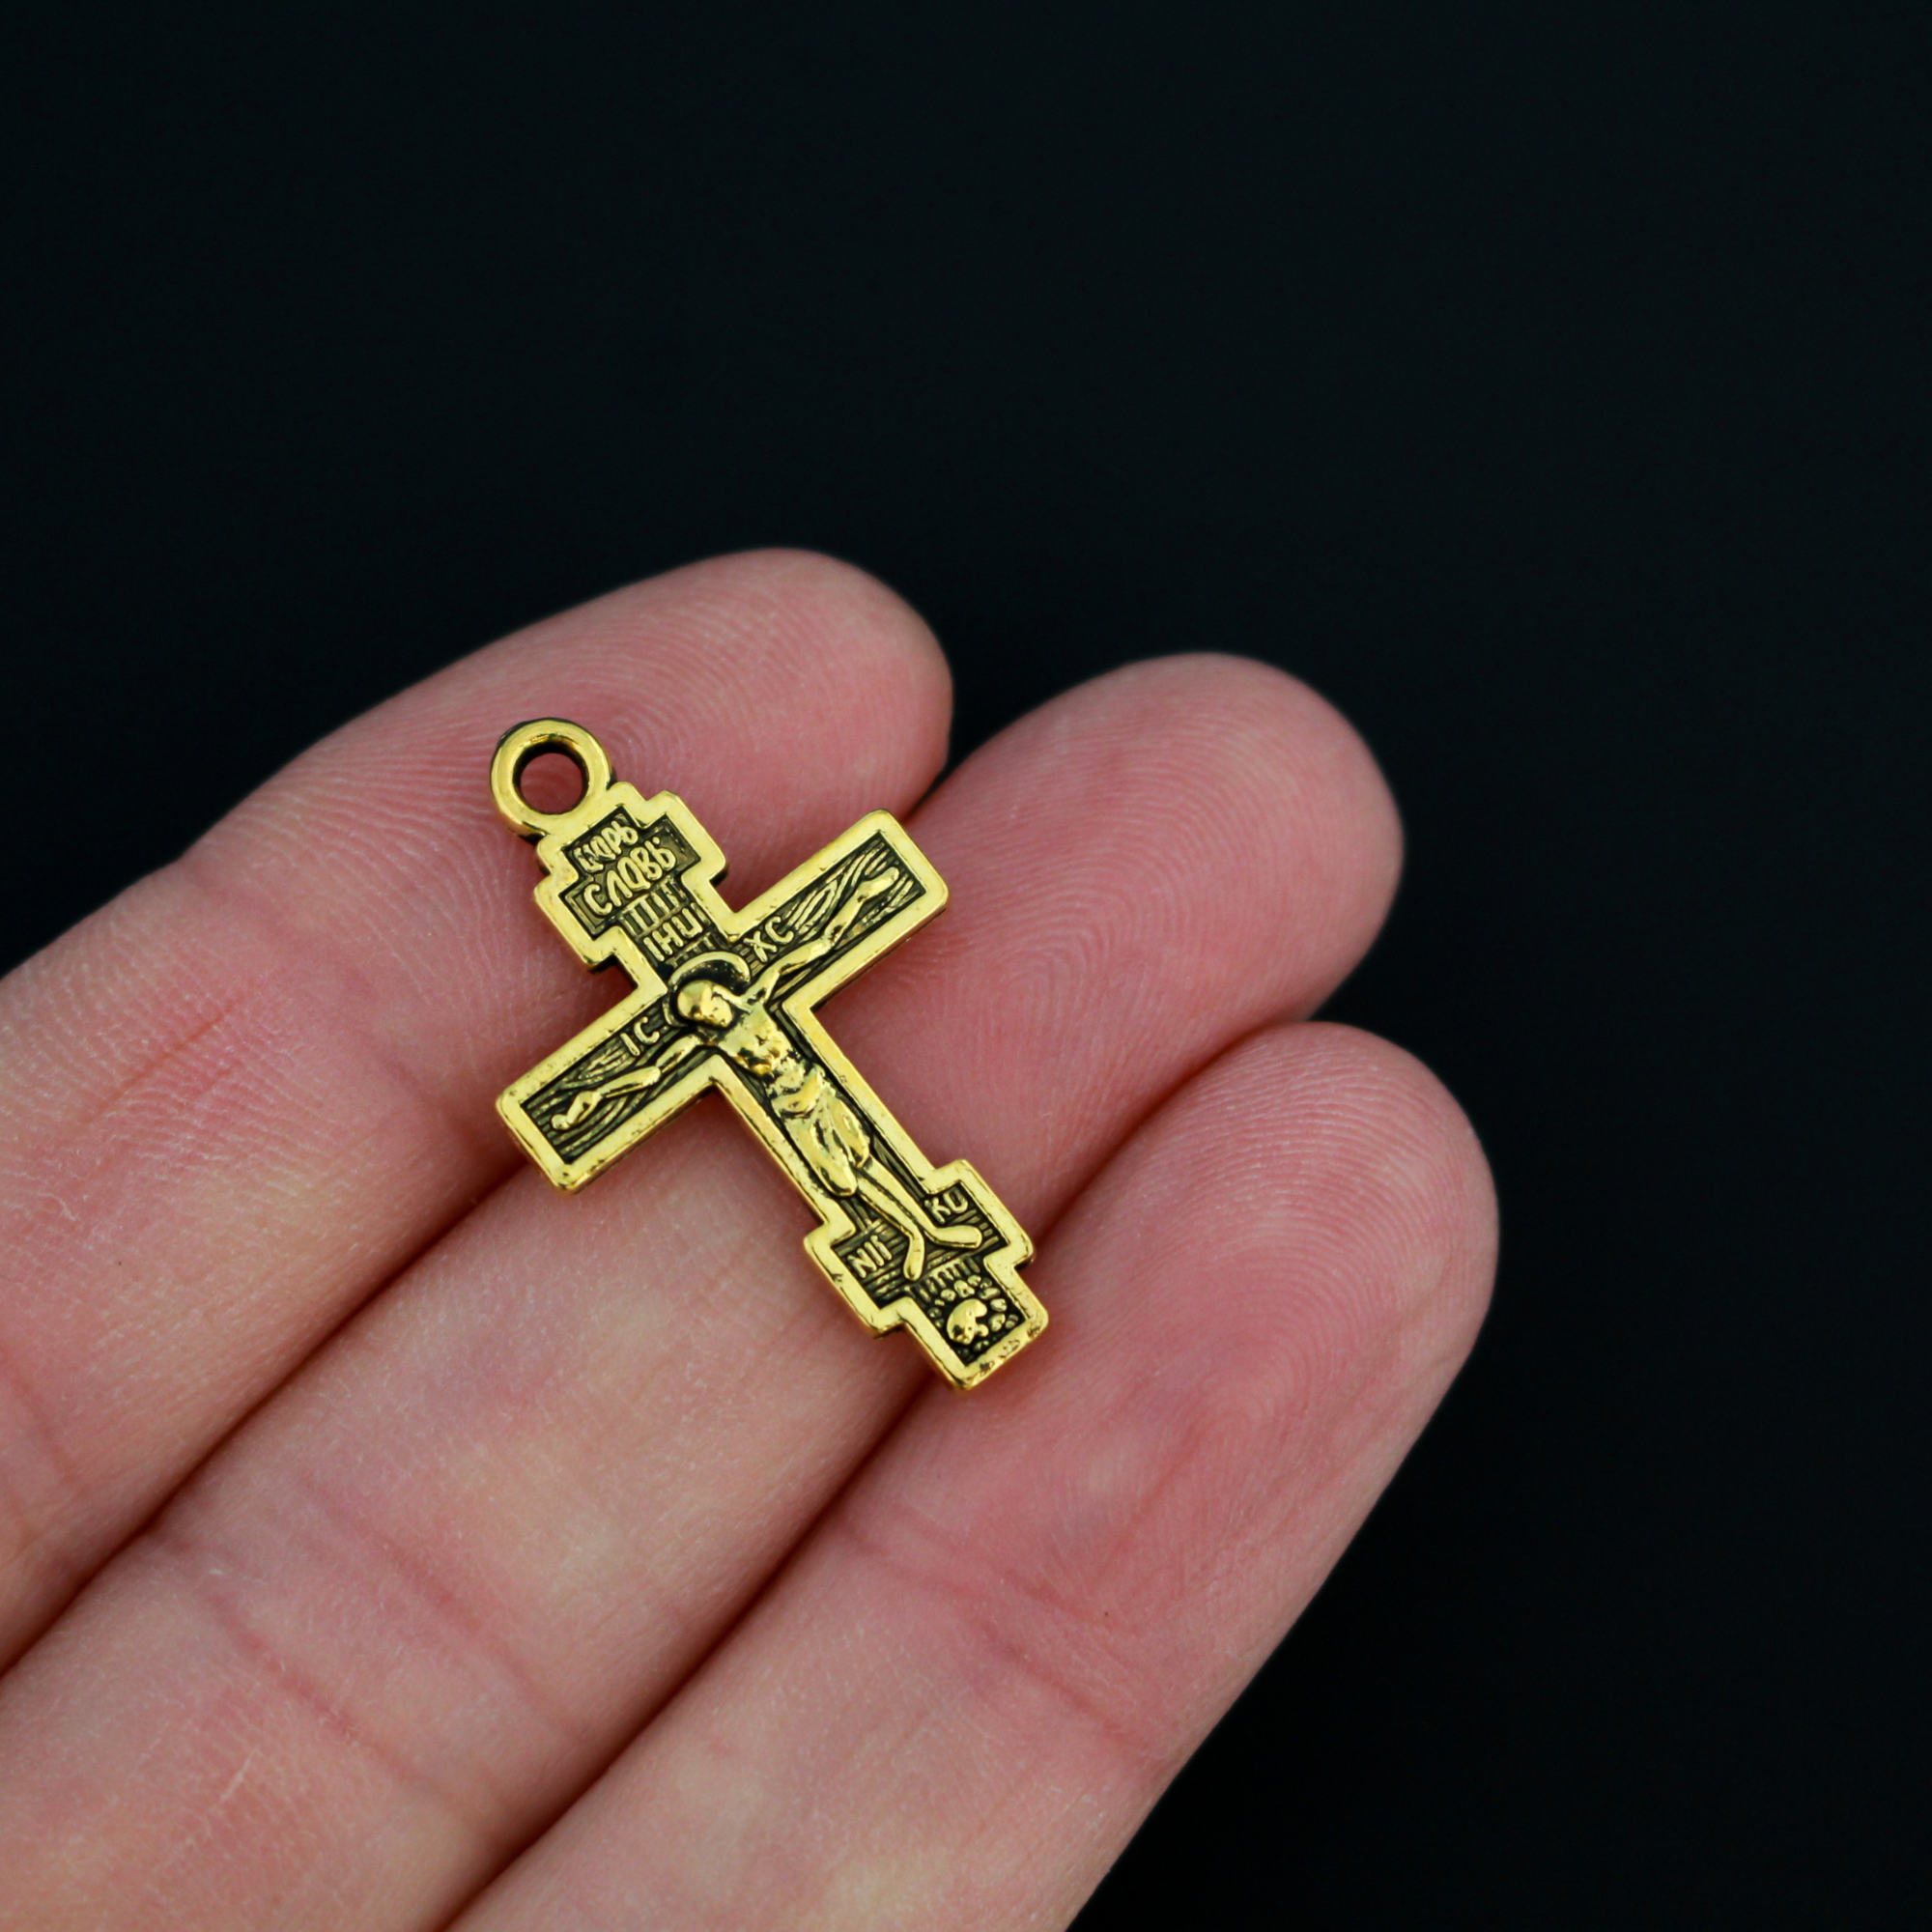 Eastern Orthodox crucifix charms in an antiqued gold finish, one inch long